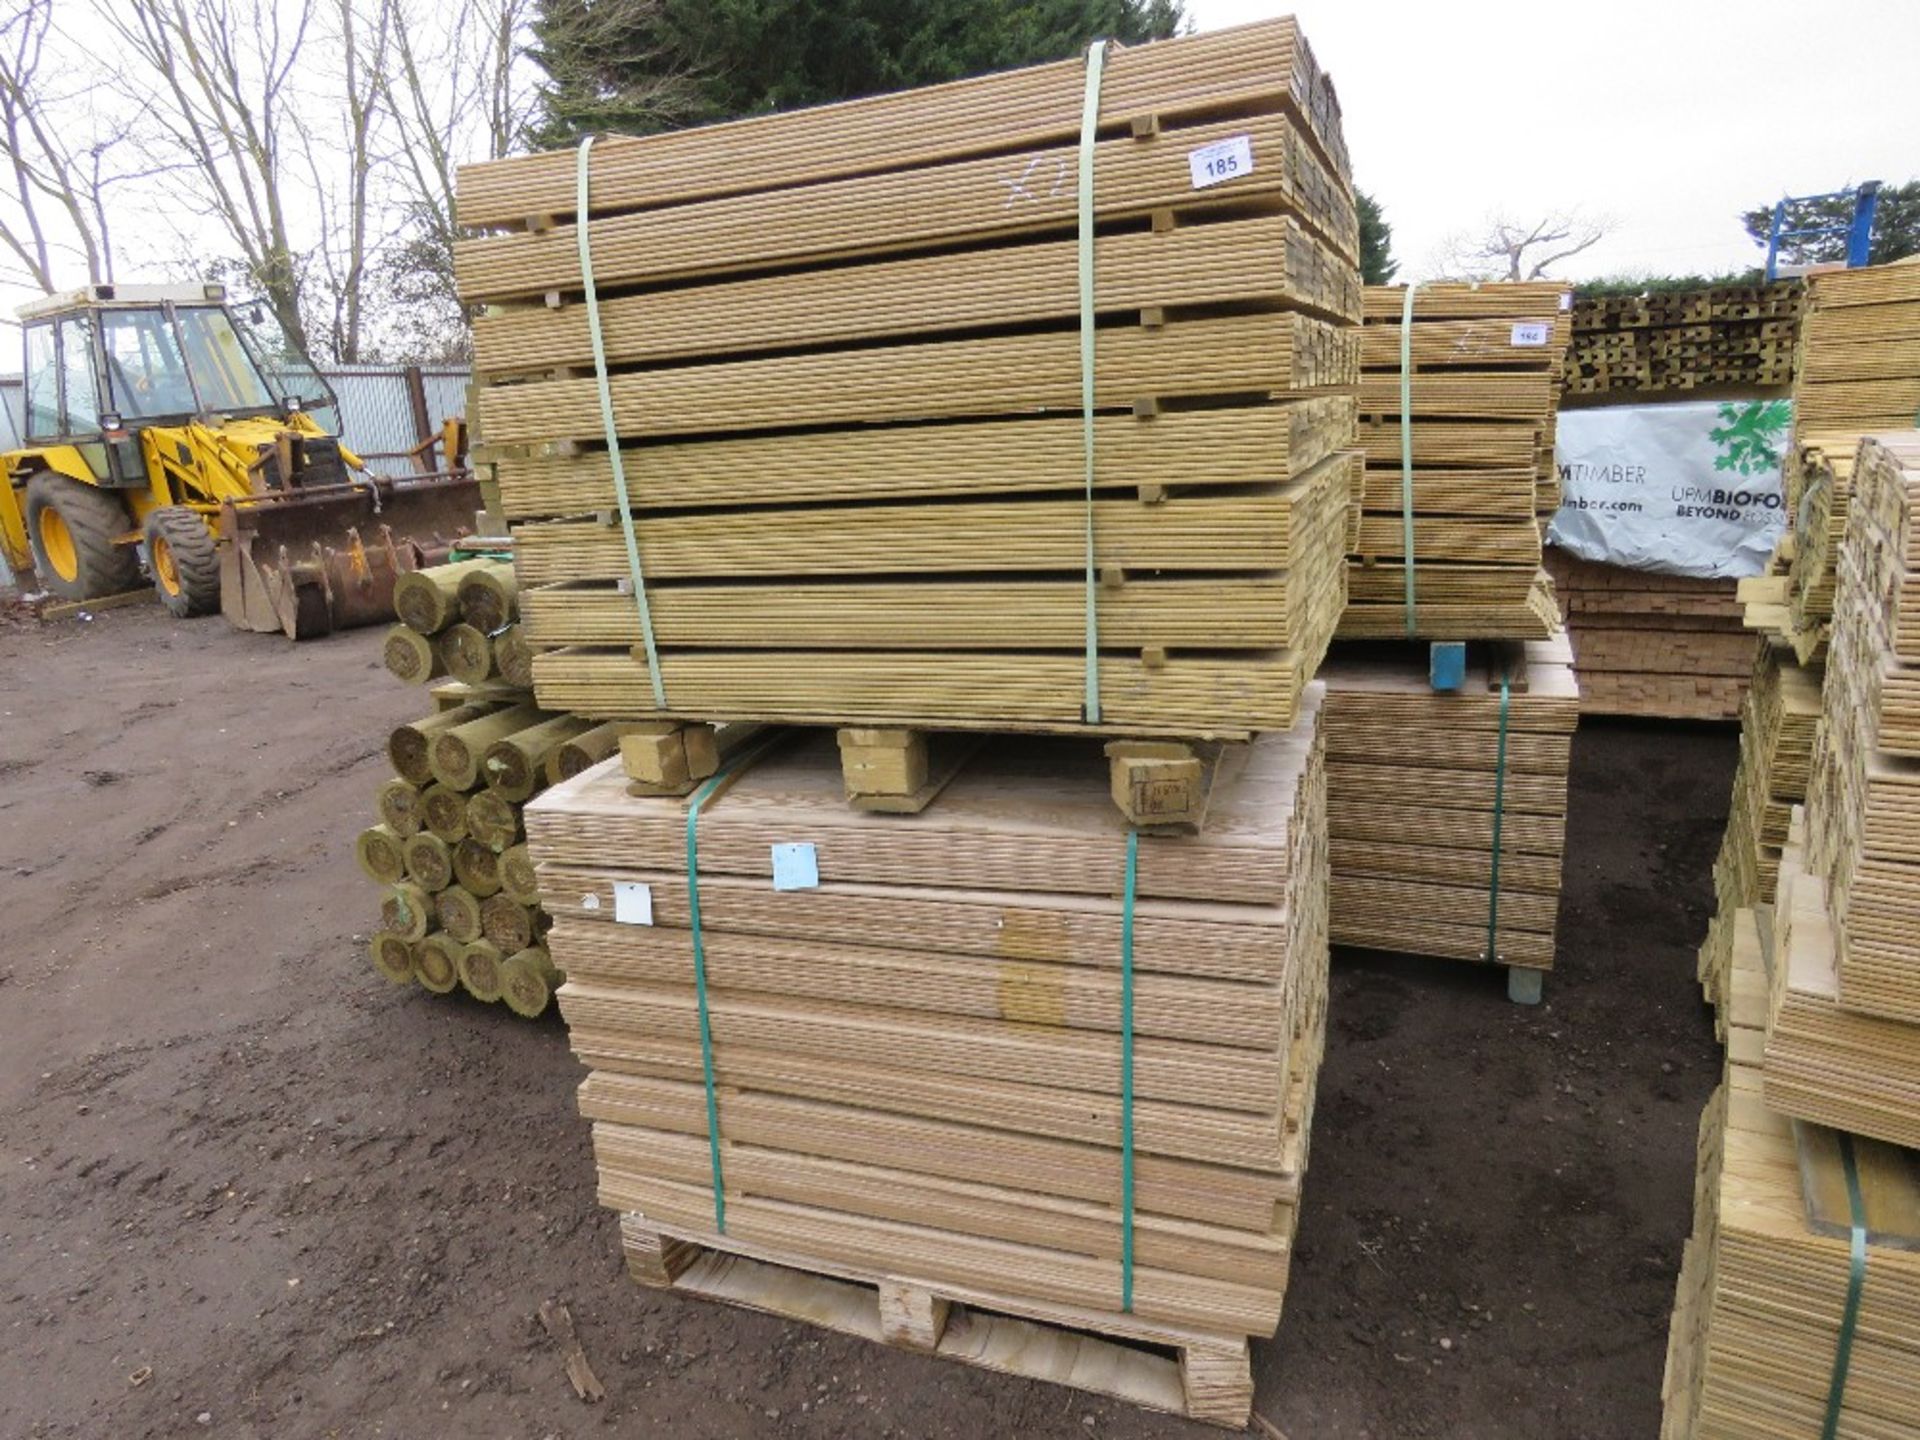 2 X PACKS OF PRESSURE TREATED HIT AND MISS FENCE CLADDING TIMBER BOARDS: 1.14M LENGTH X 100MM WIDTH